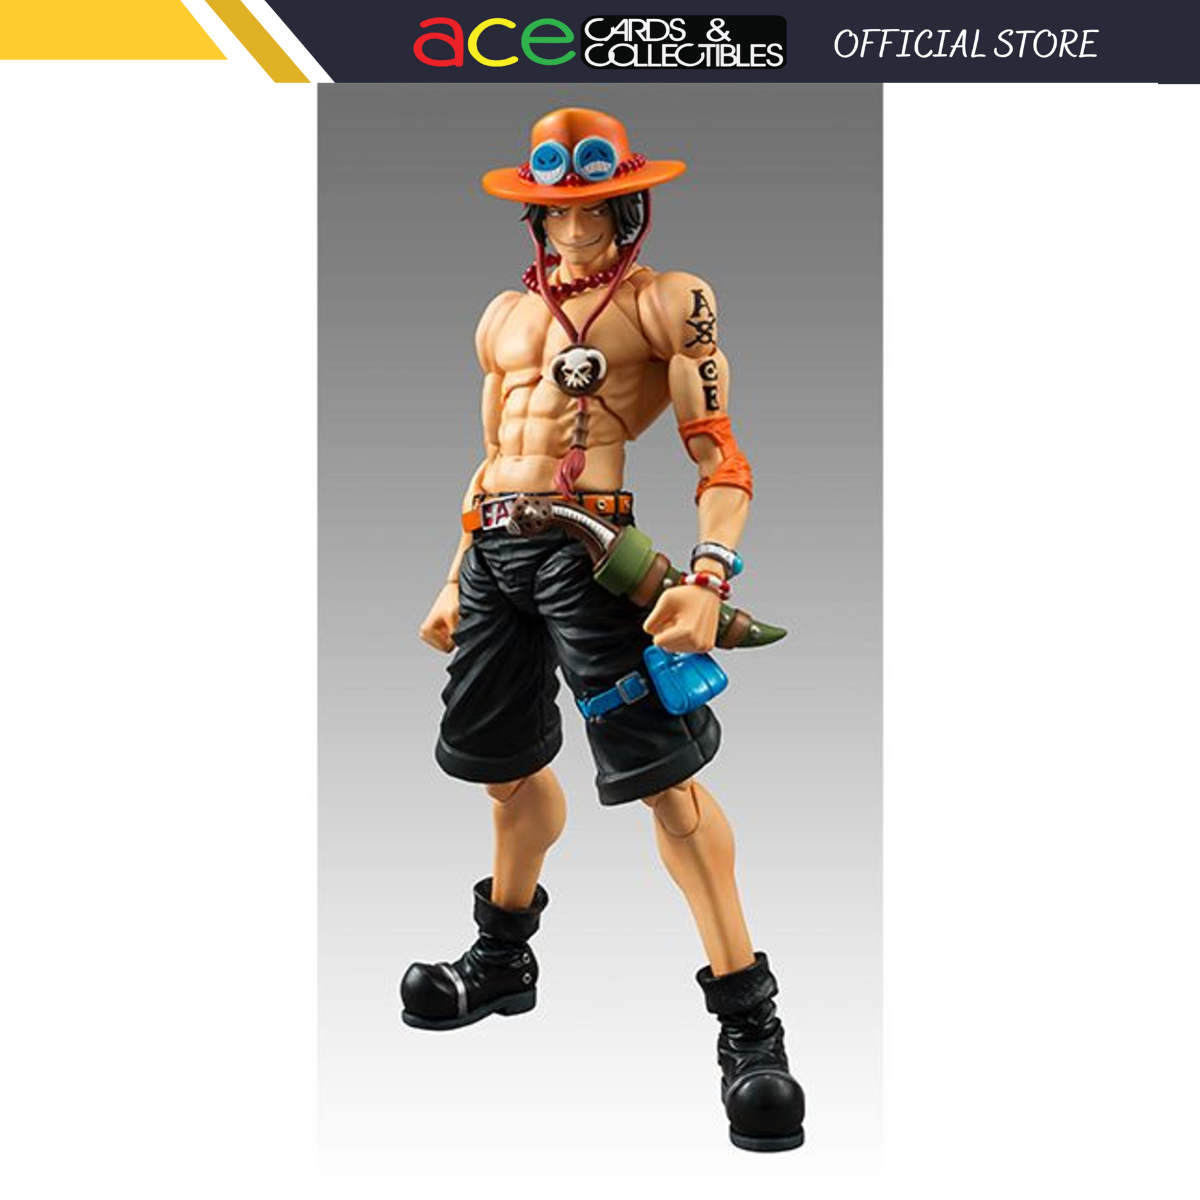 Variable Action Heroes One Piece "Portgas D. Ace"-MegaHouse-Ace Cards & Collectibles